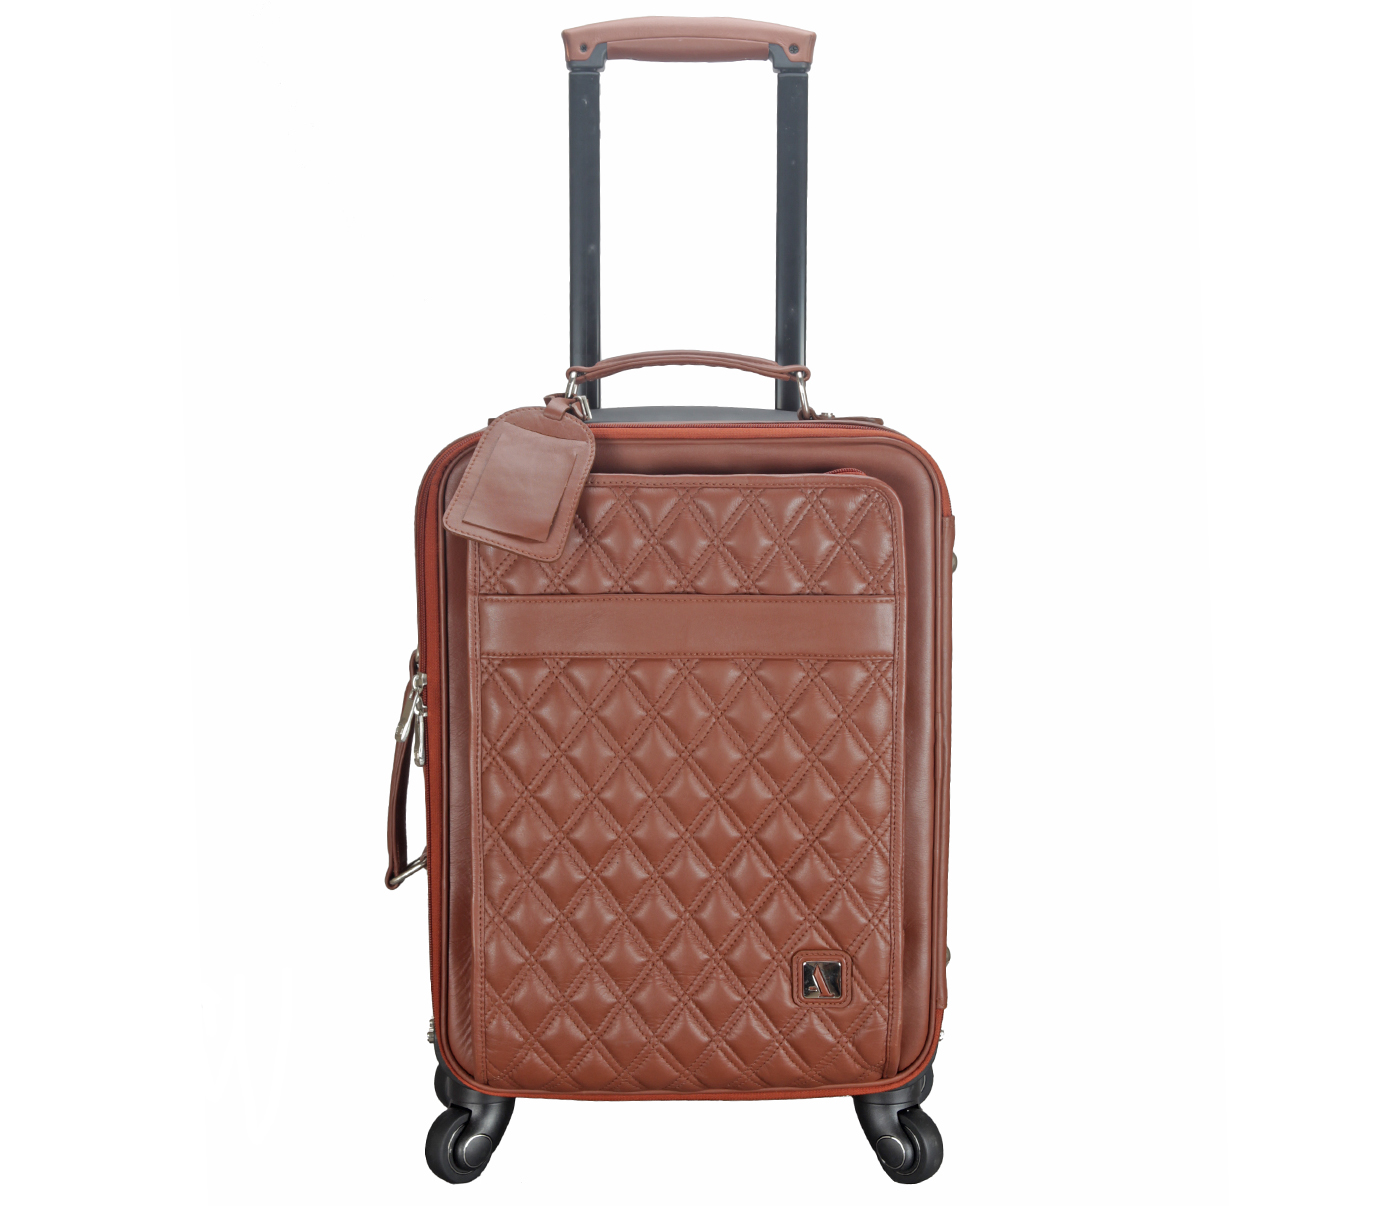 T53-Filippo-Travel cabin luggage strolley in Genuine Leather - Tan